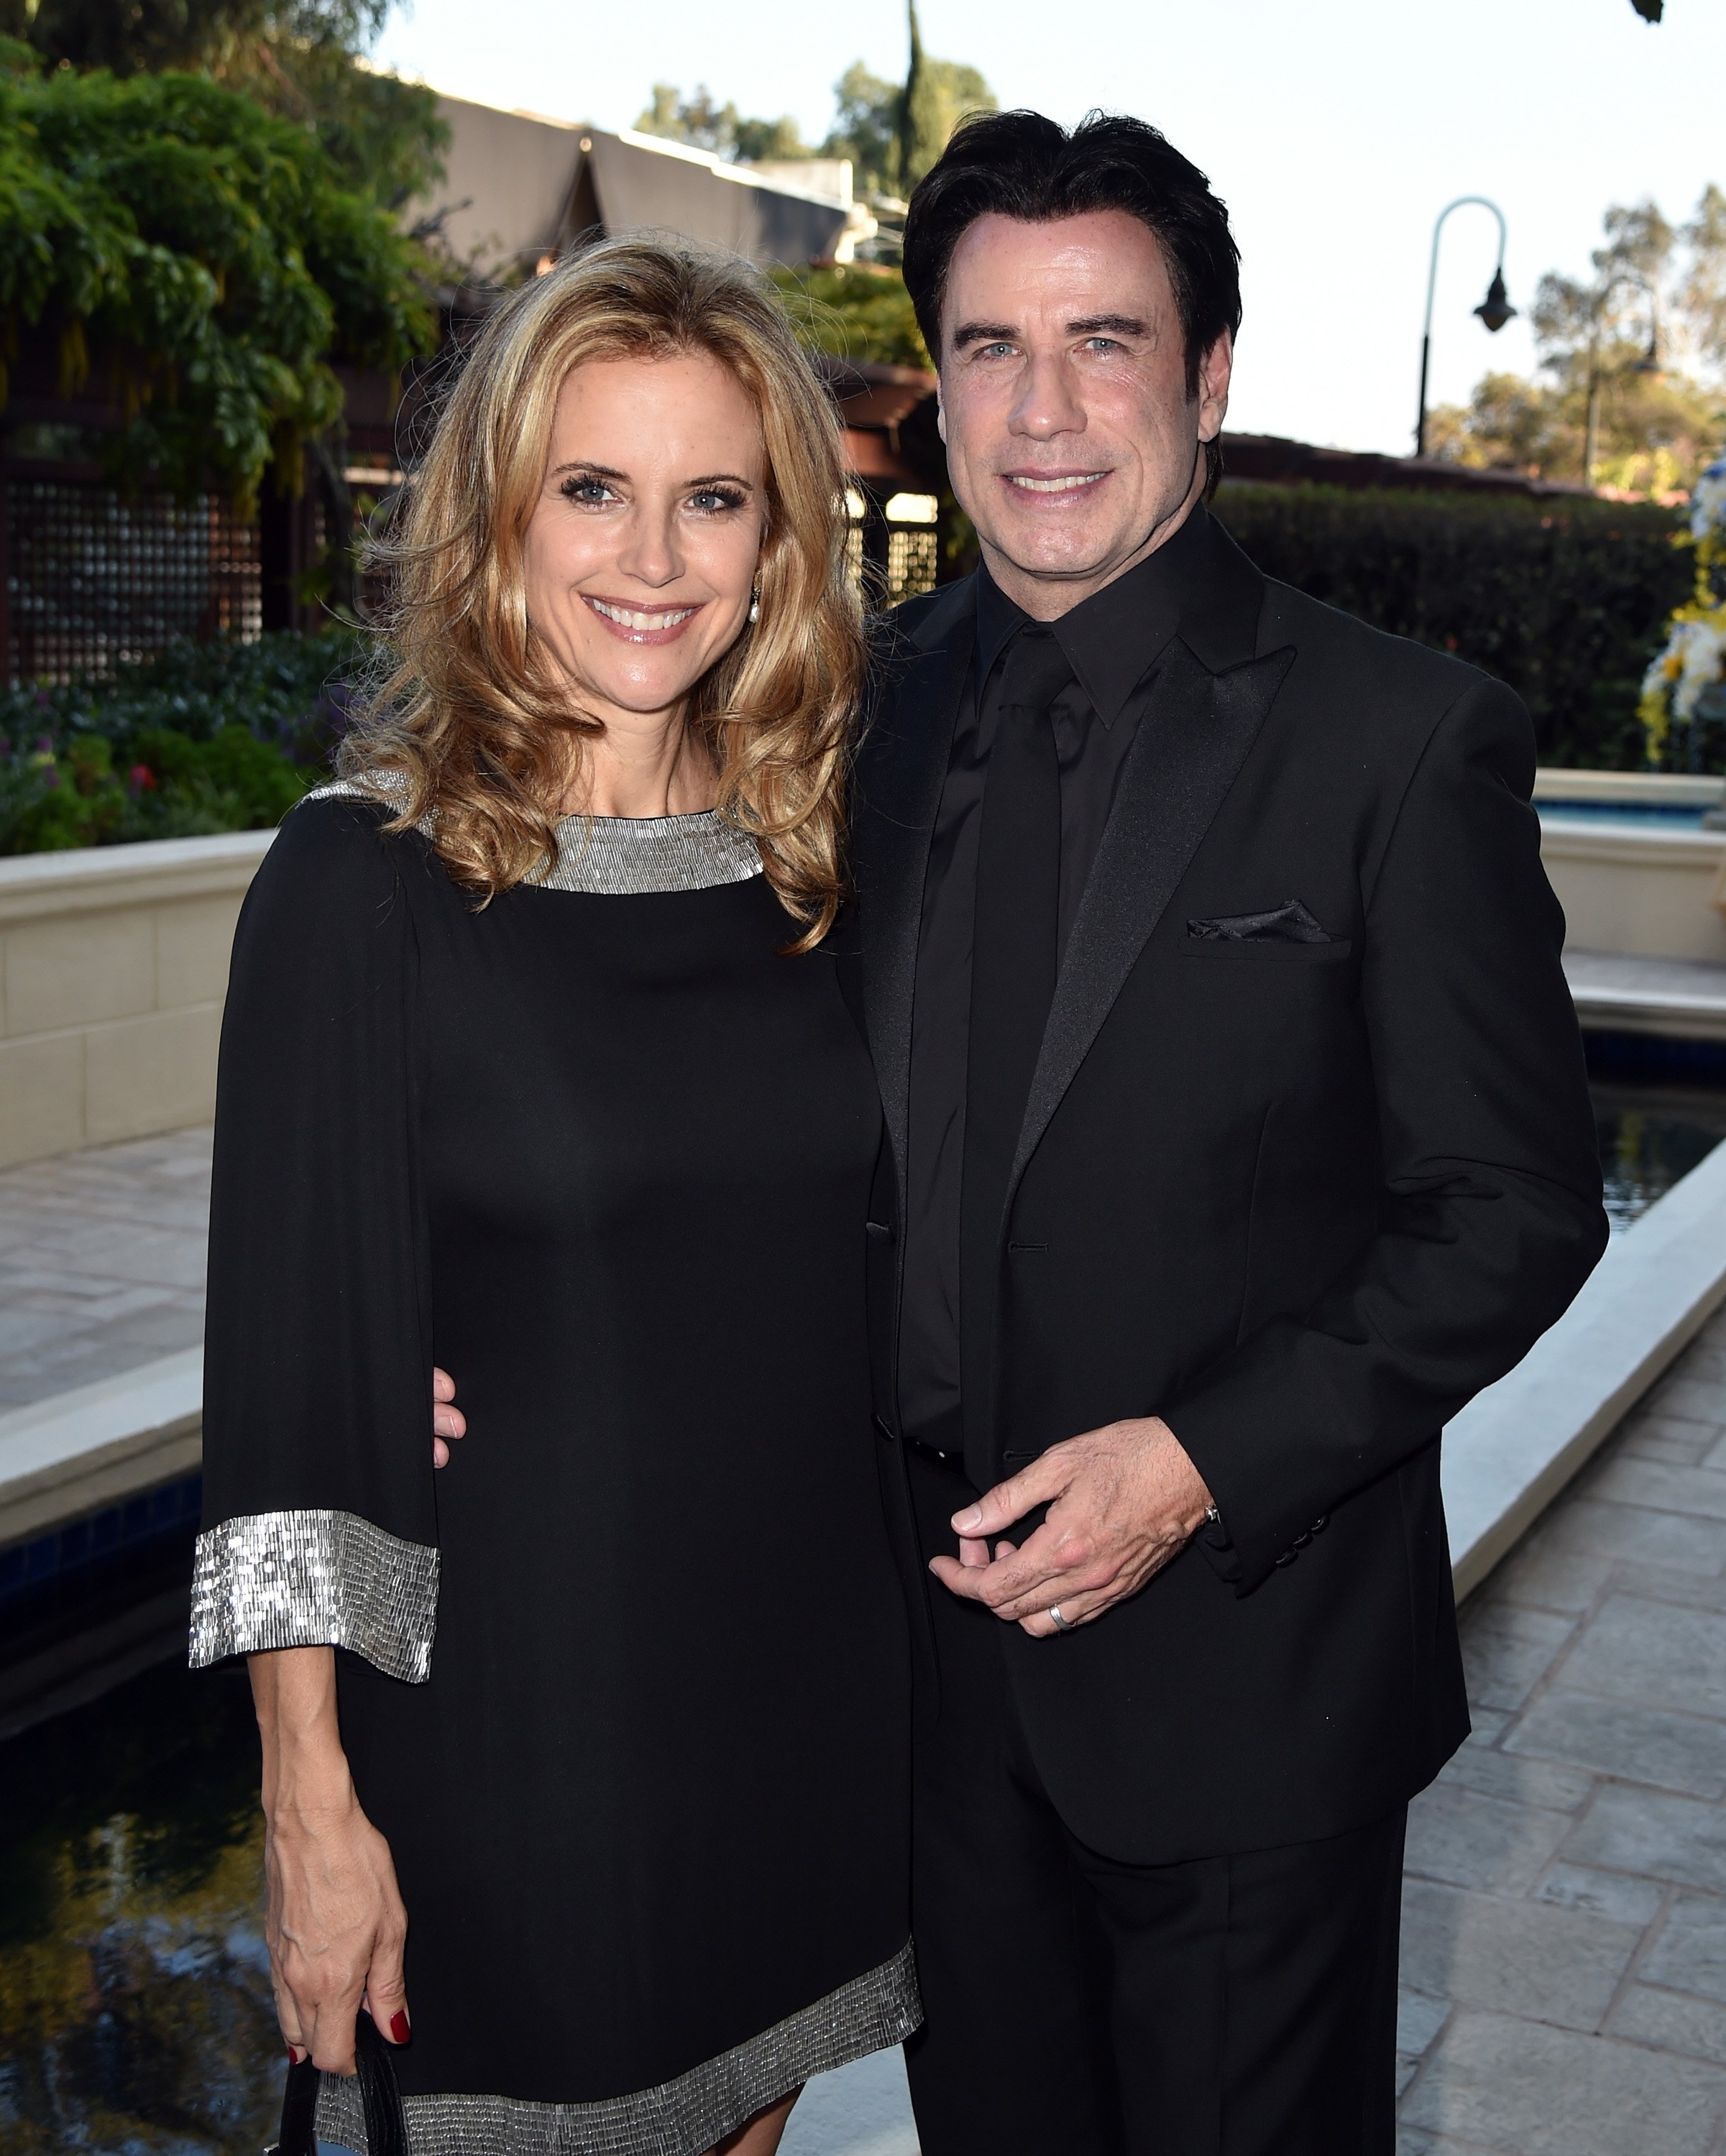 Kelly Preston and John Travolta attending the Church of Scientology Celebrity Centre 45th Anniversary Gala on August 9, 2014 in Los Angeles, California. | Source: Getty Images